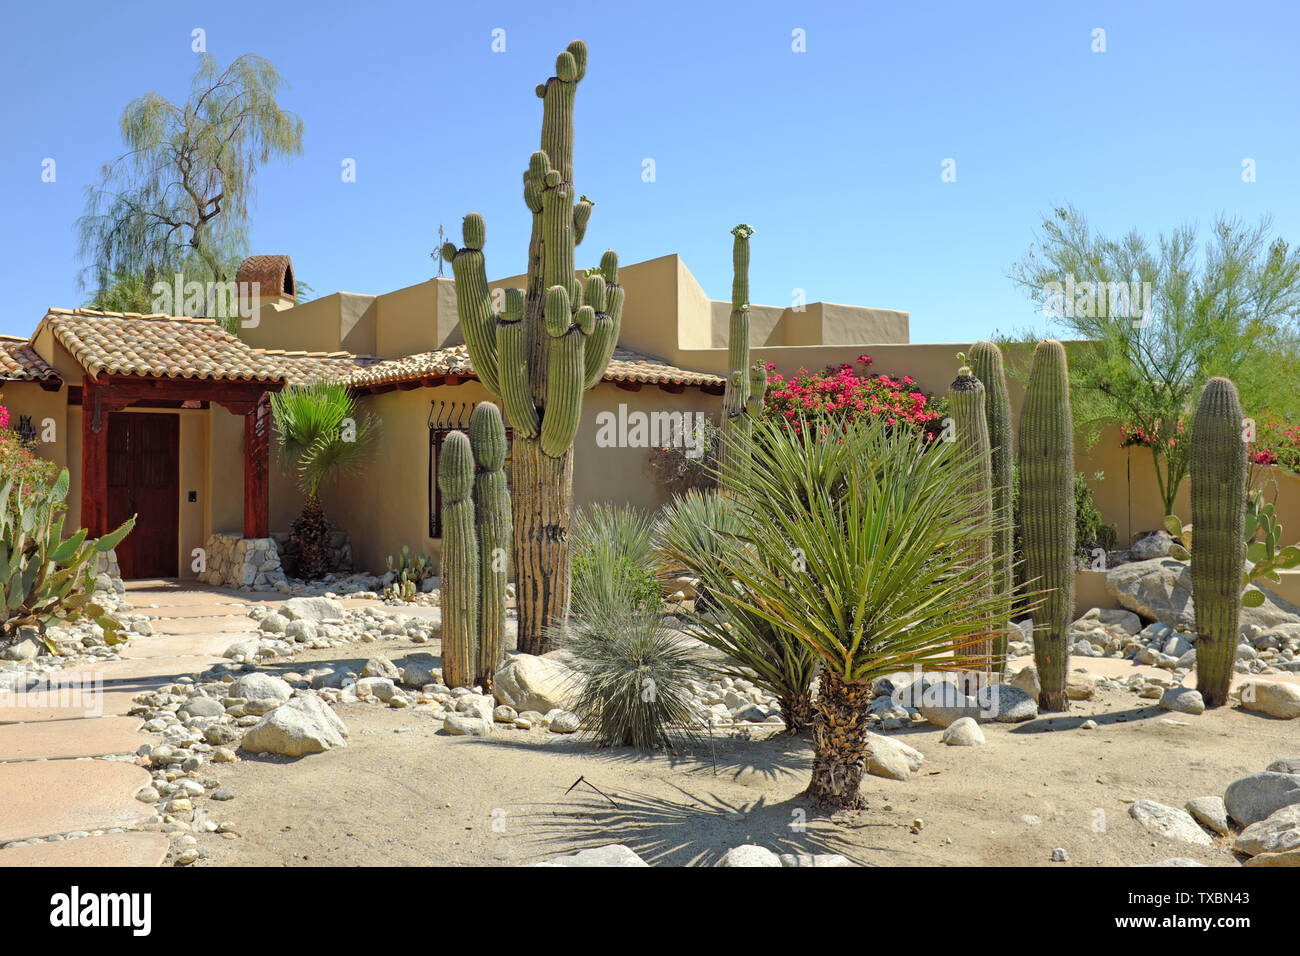 The succulent garden with desert cacti landscaped in the front yard of a home in Palm Springs, California in 2019. Stock Photo